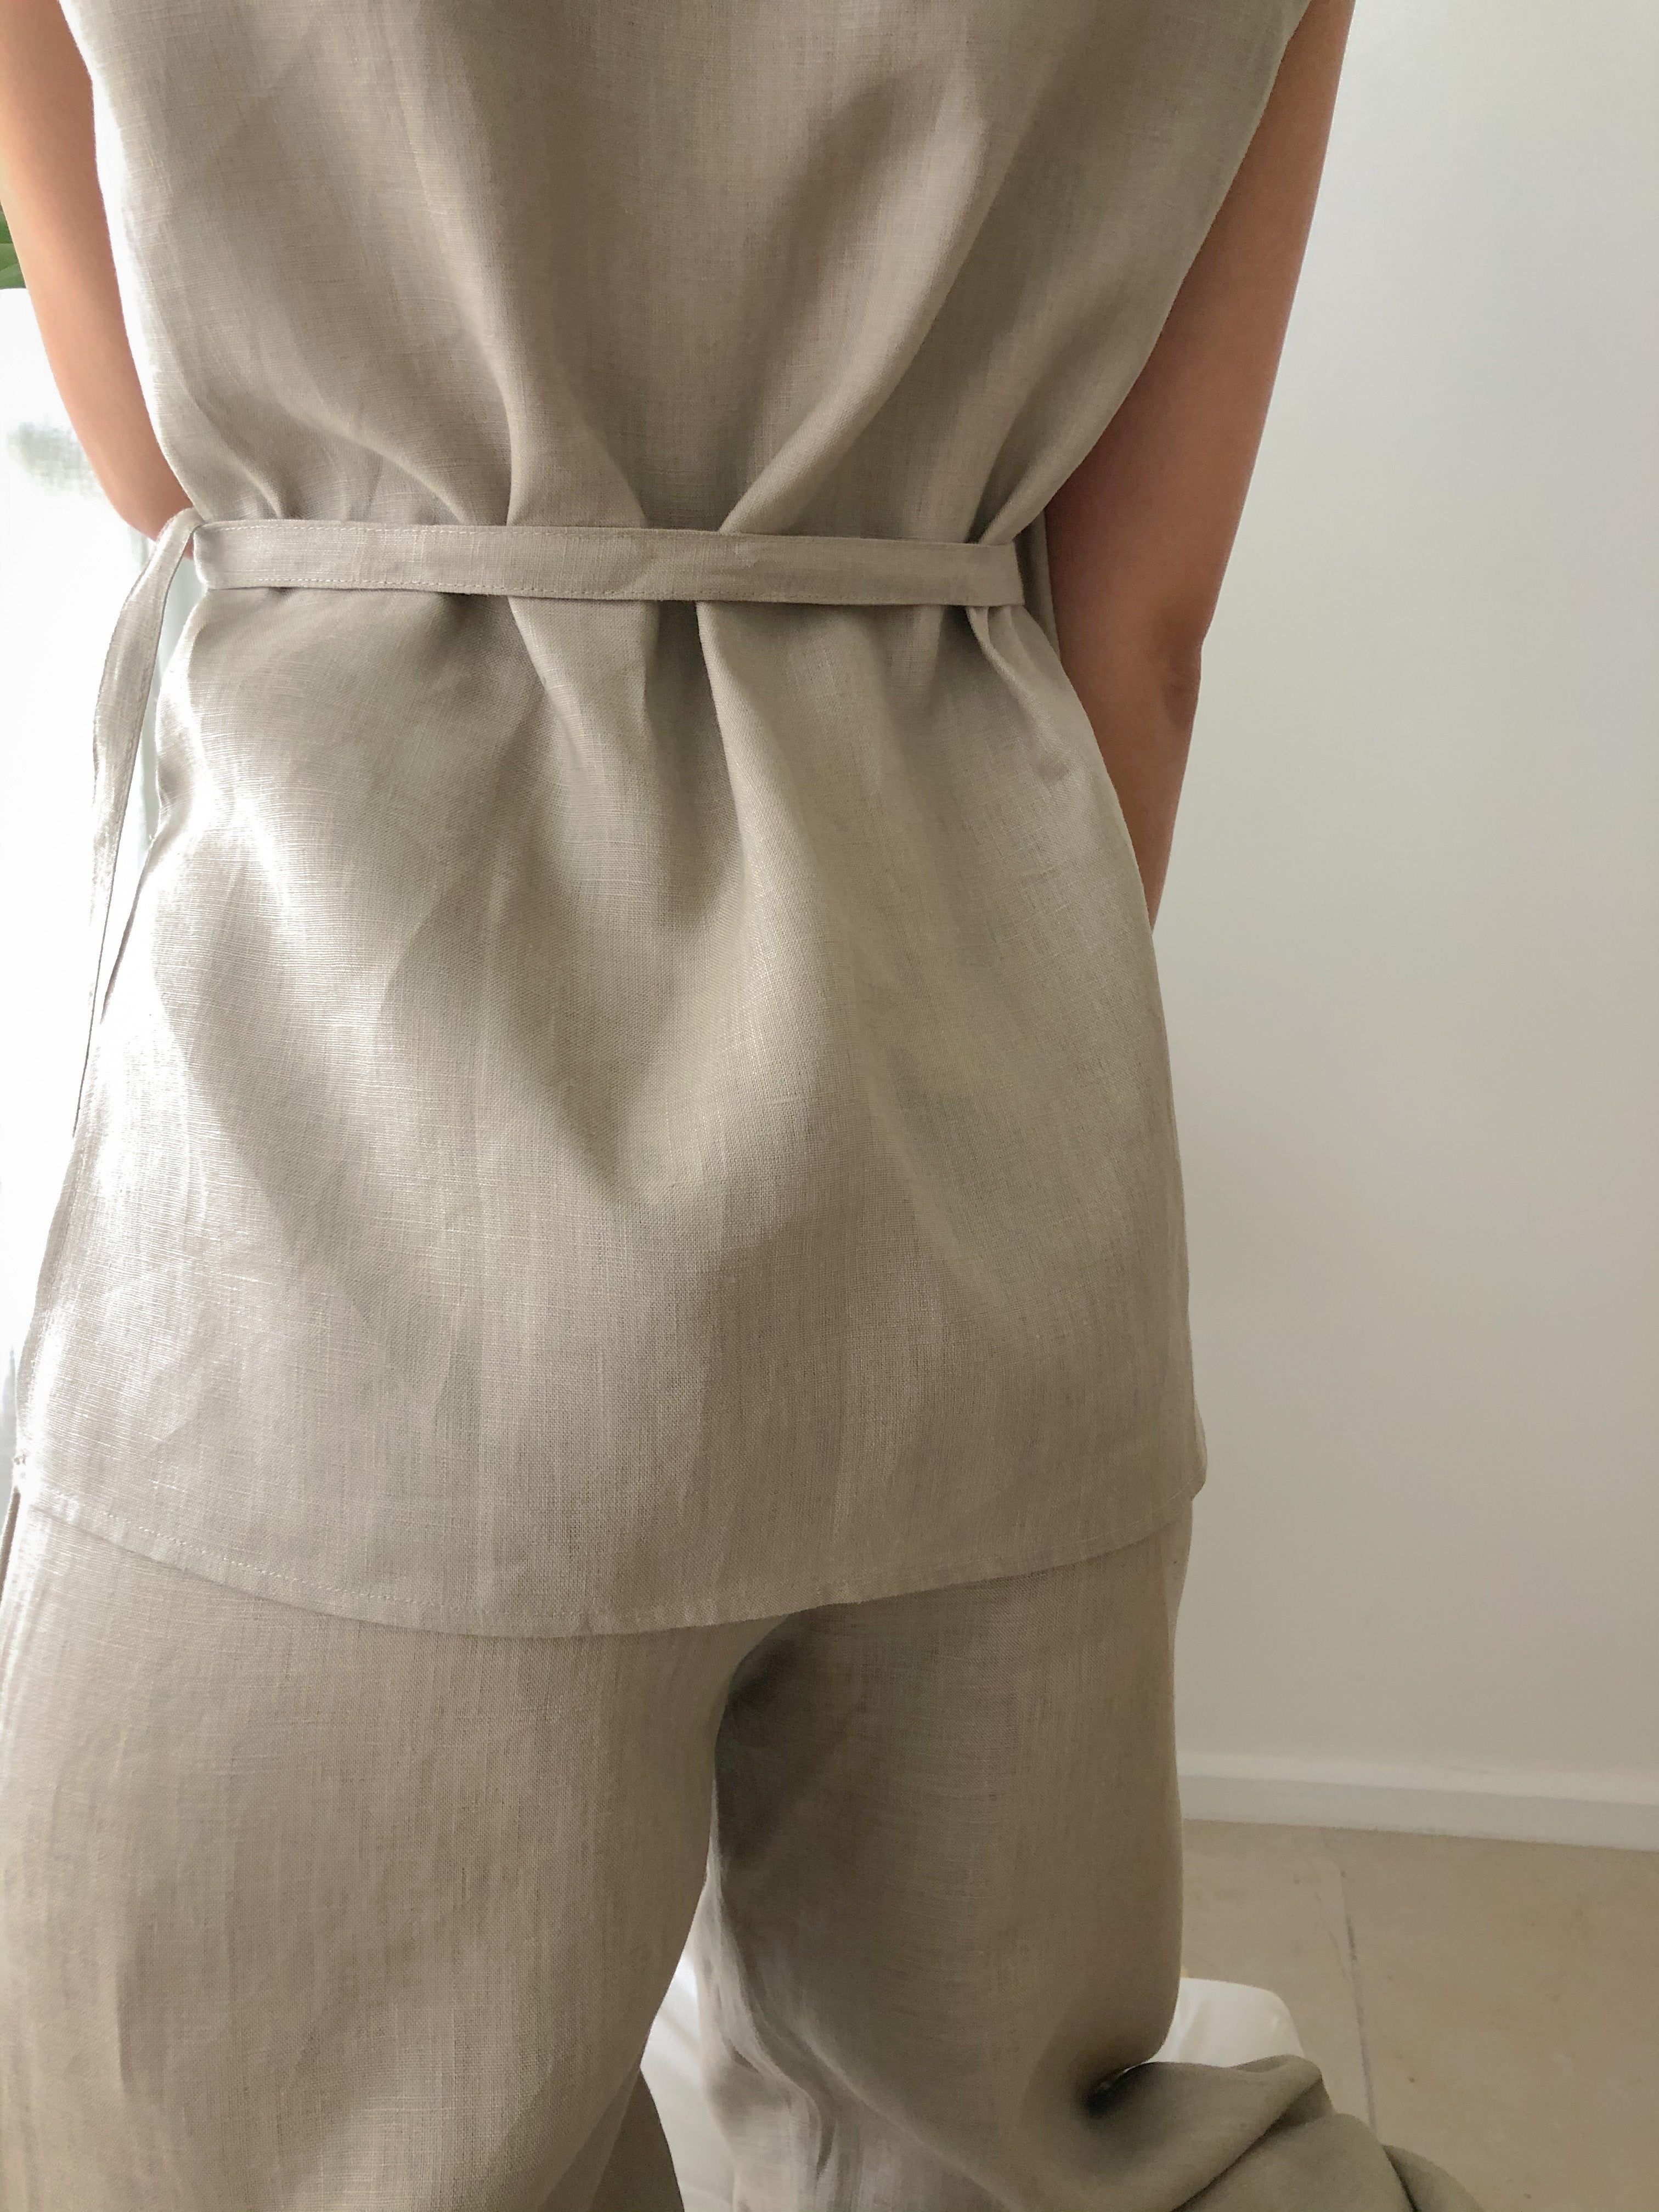 WRAP VEST in light taupe